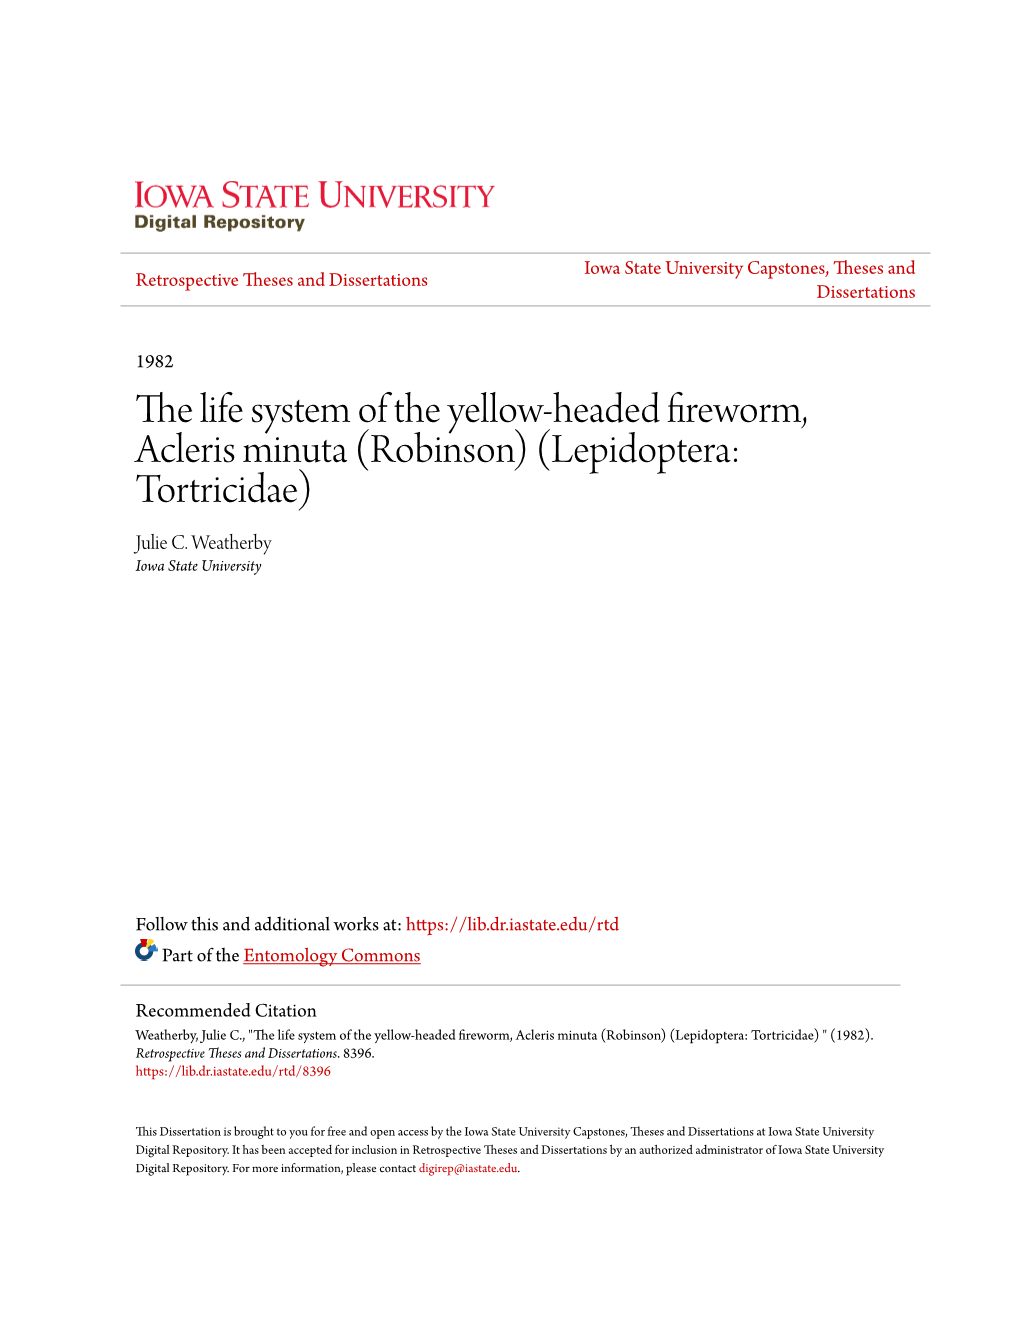 The Life System of the Yellow-Headed Fireworm, Acleris Minuta (Robinson) (Lepidoptera: Tortricidae) Julie C